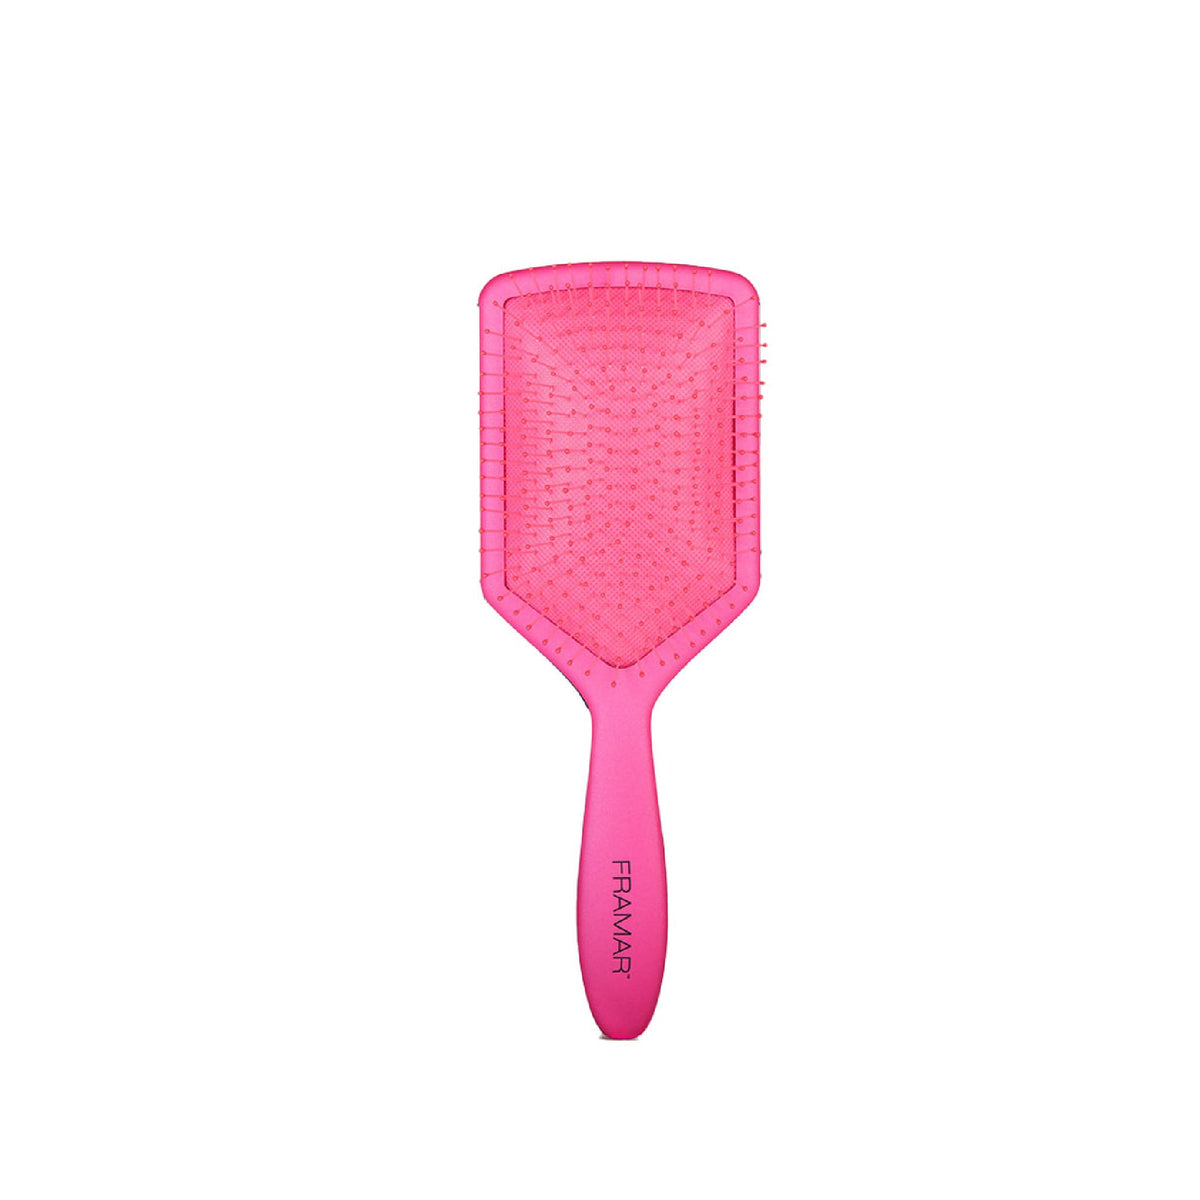 Framar Paddle Brush - Haircare Superstore